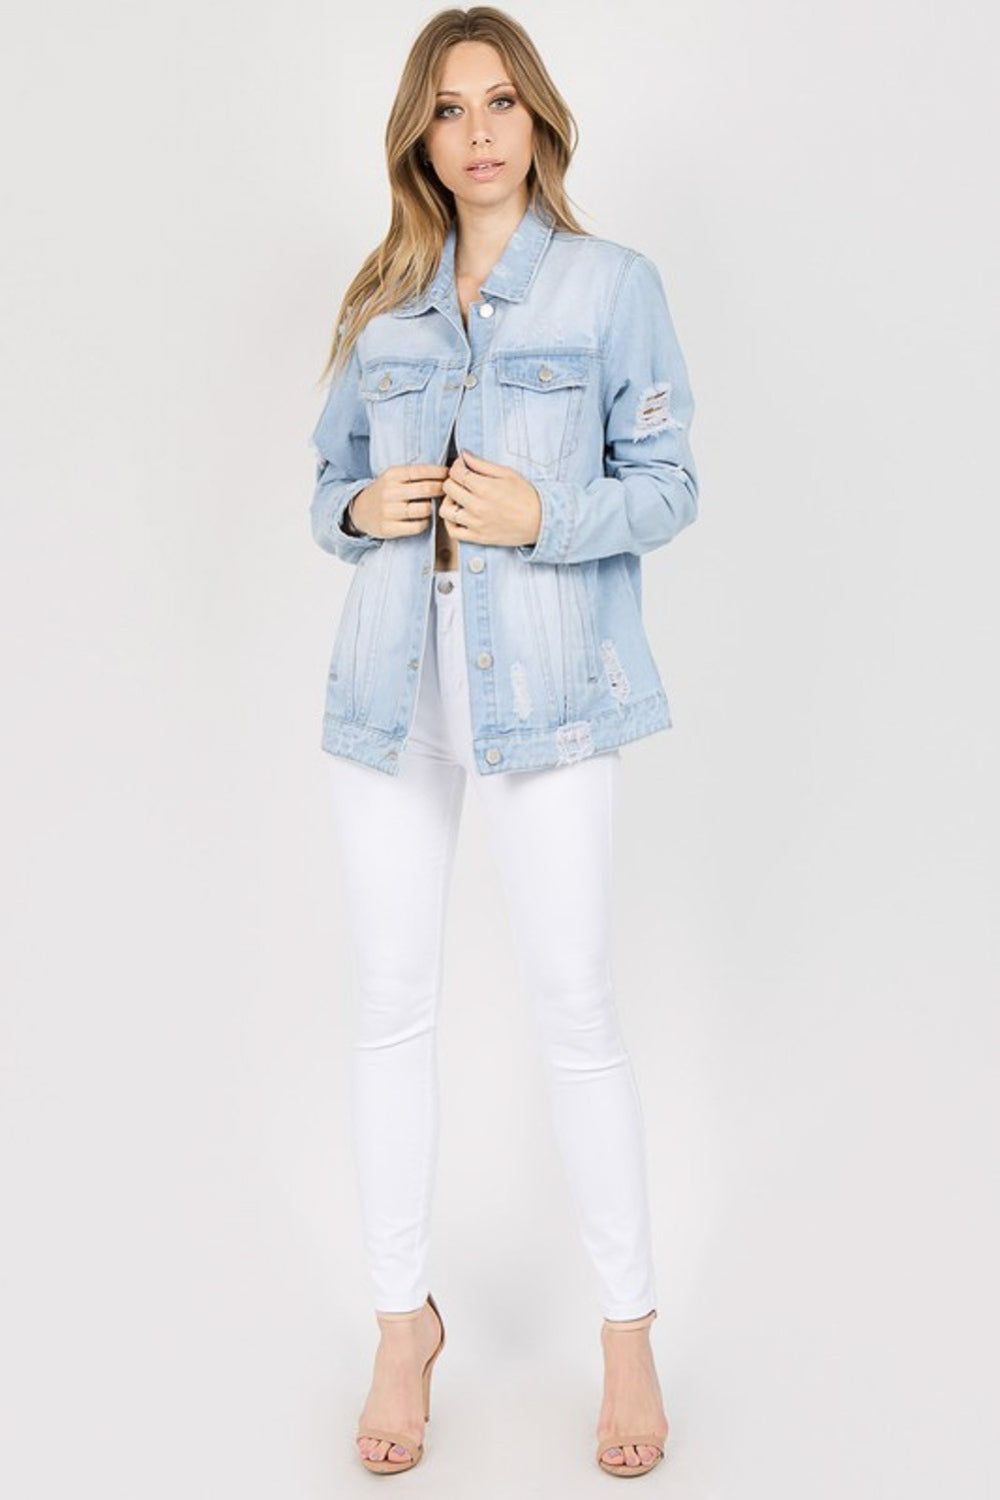 American Bazi Letter Patched Distressed Denim Jacket  | KIKI COUTURE